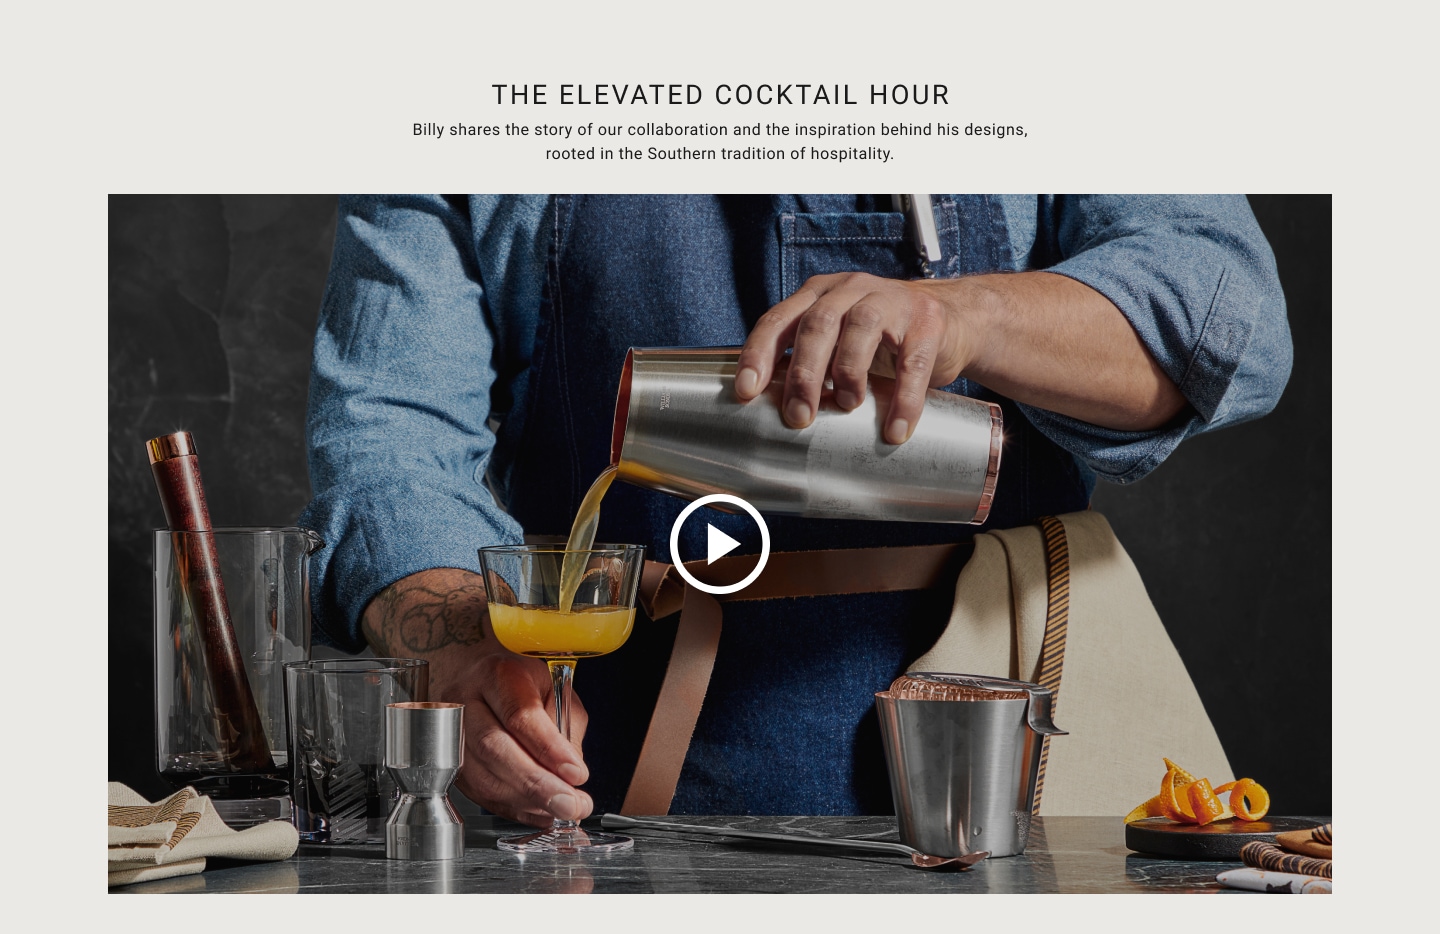 The Elevated Cocktail Hour